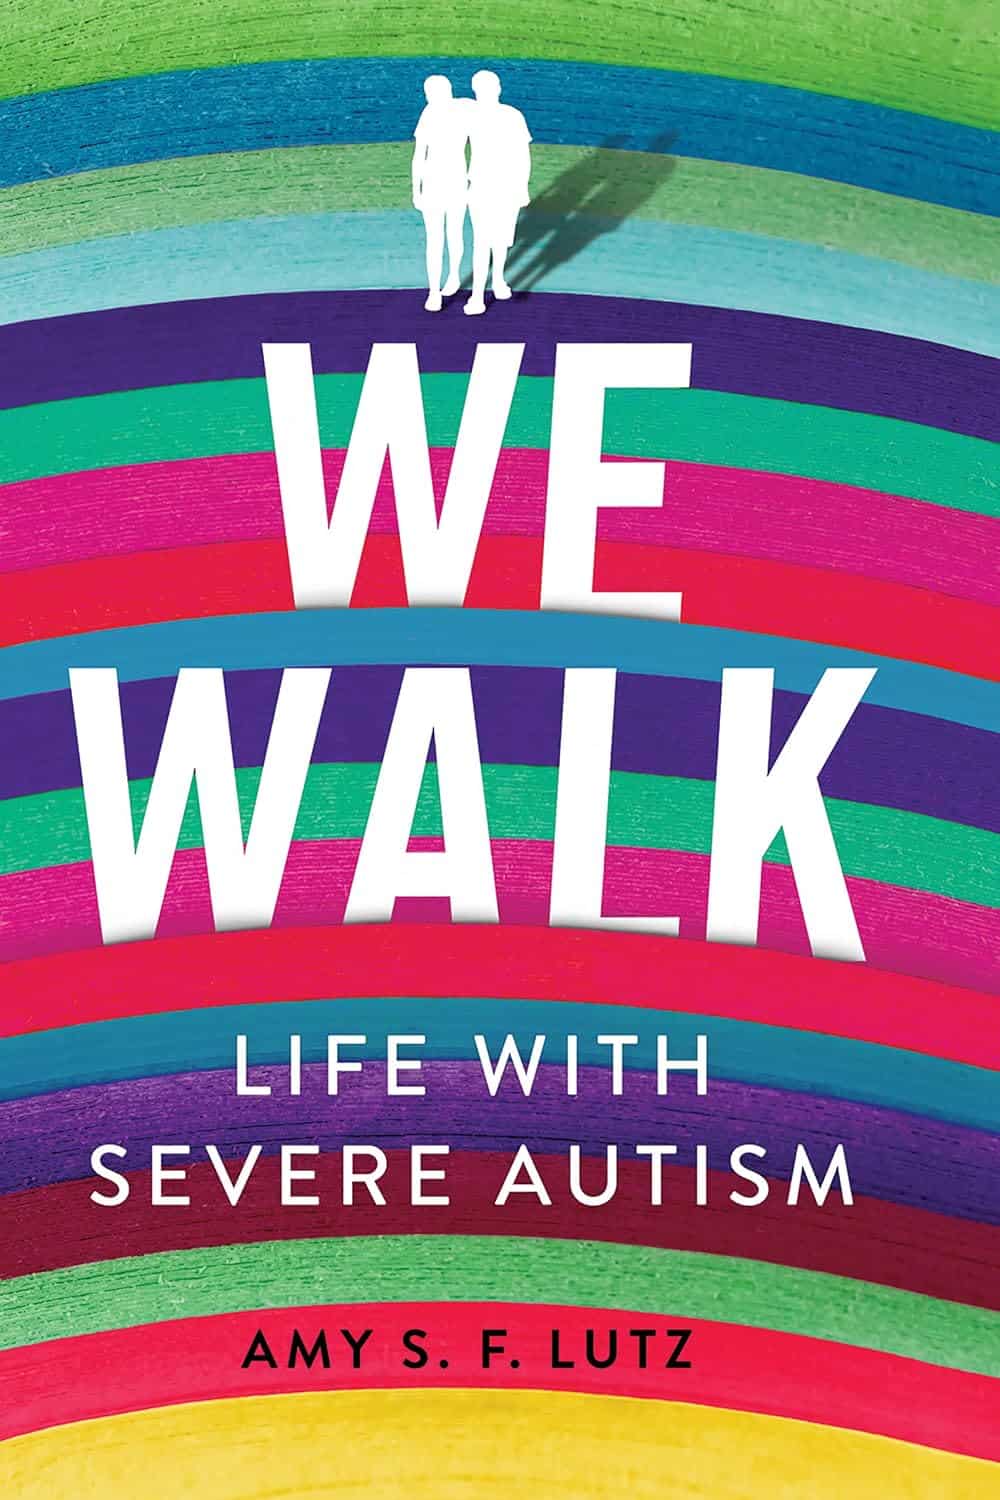 We Walk: Life with Severe Autism by Amy S. F. Lutz